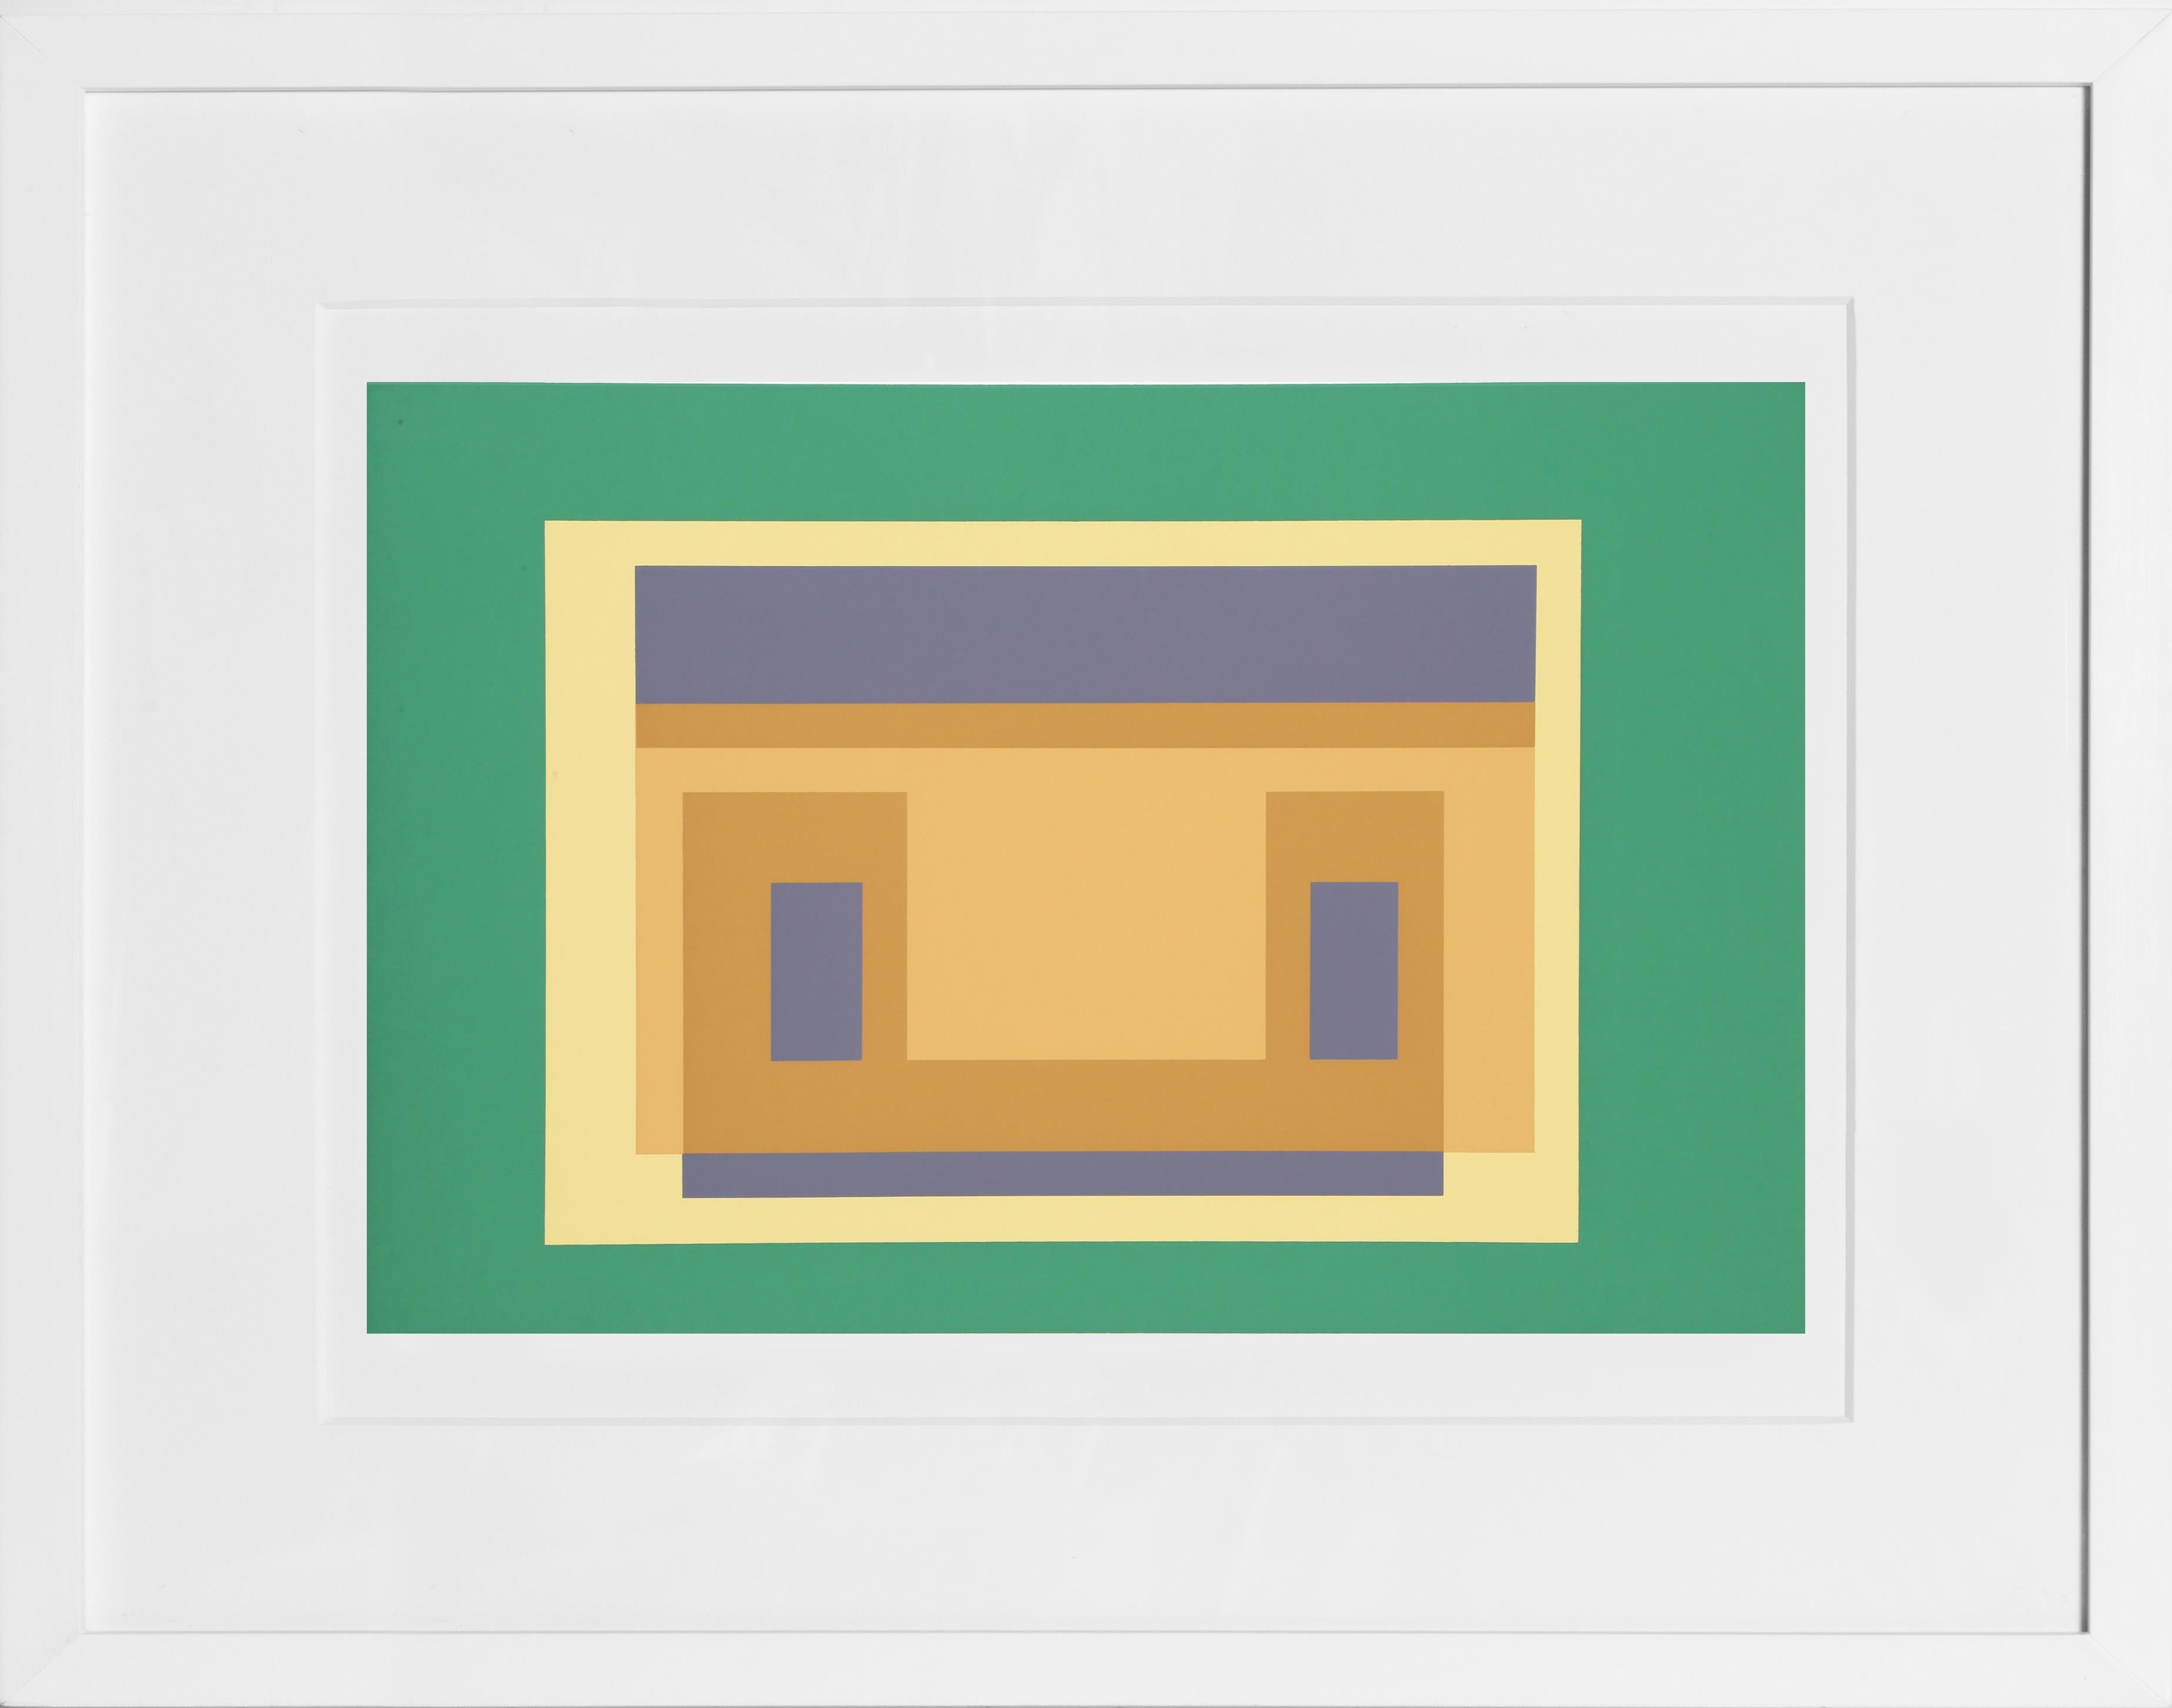 Artist:	Josef Albers
Title: Variant from the Formulation: Articulation portfolio
Year:	1972
Medium:	Silkscreen
Edition:	972/1000
Image Size: 9 x 14 inches
Paper Size:	15 x 20 inches (38.1 x 50.8 cm)
Frame: 18 x 22.5 inches

Formulation: Articulation